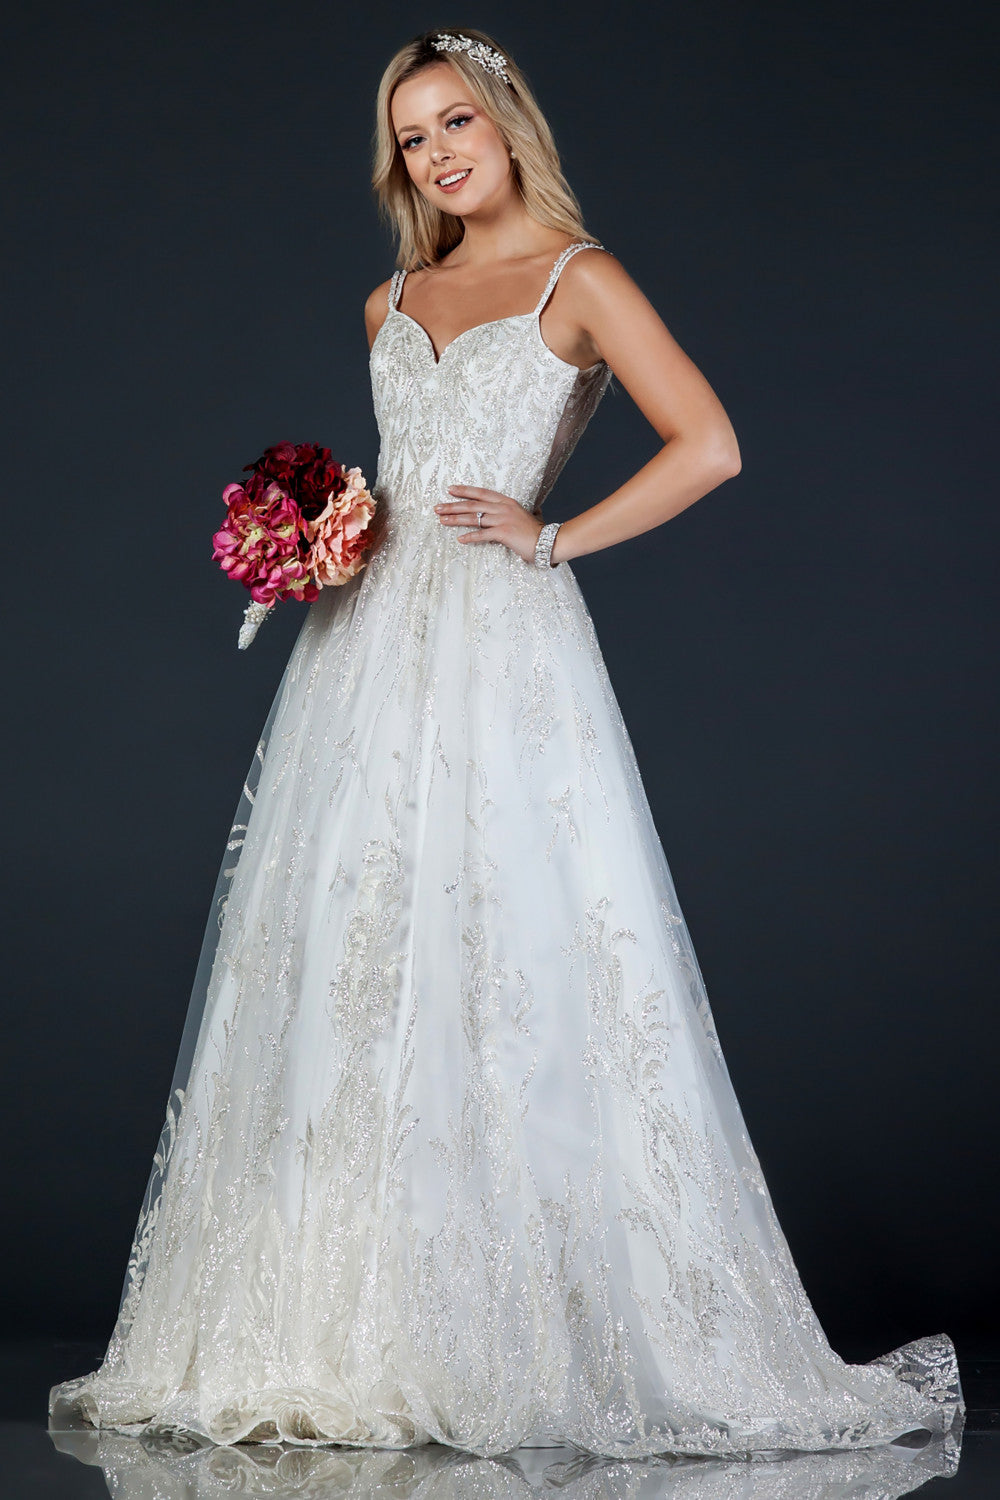 Aspeed Design -MS0004 Lace Applique Beaded A-Line Bridal Gown